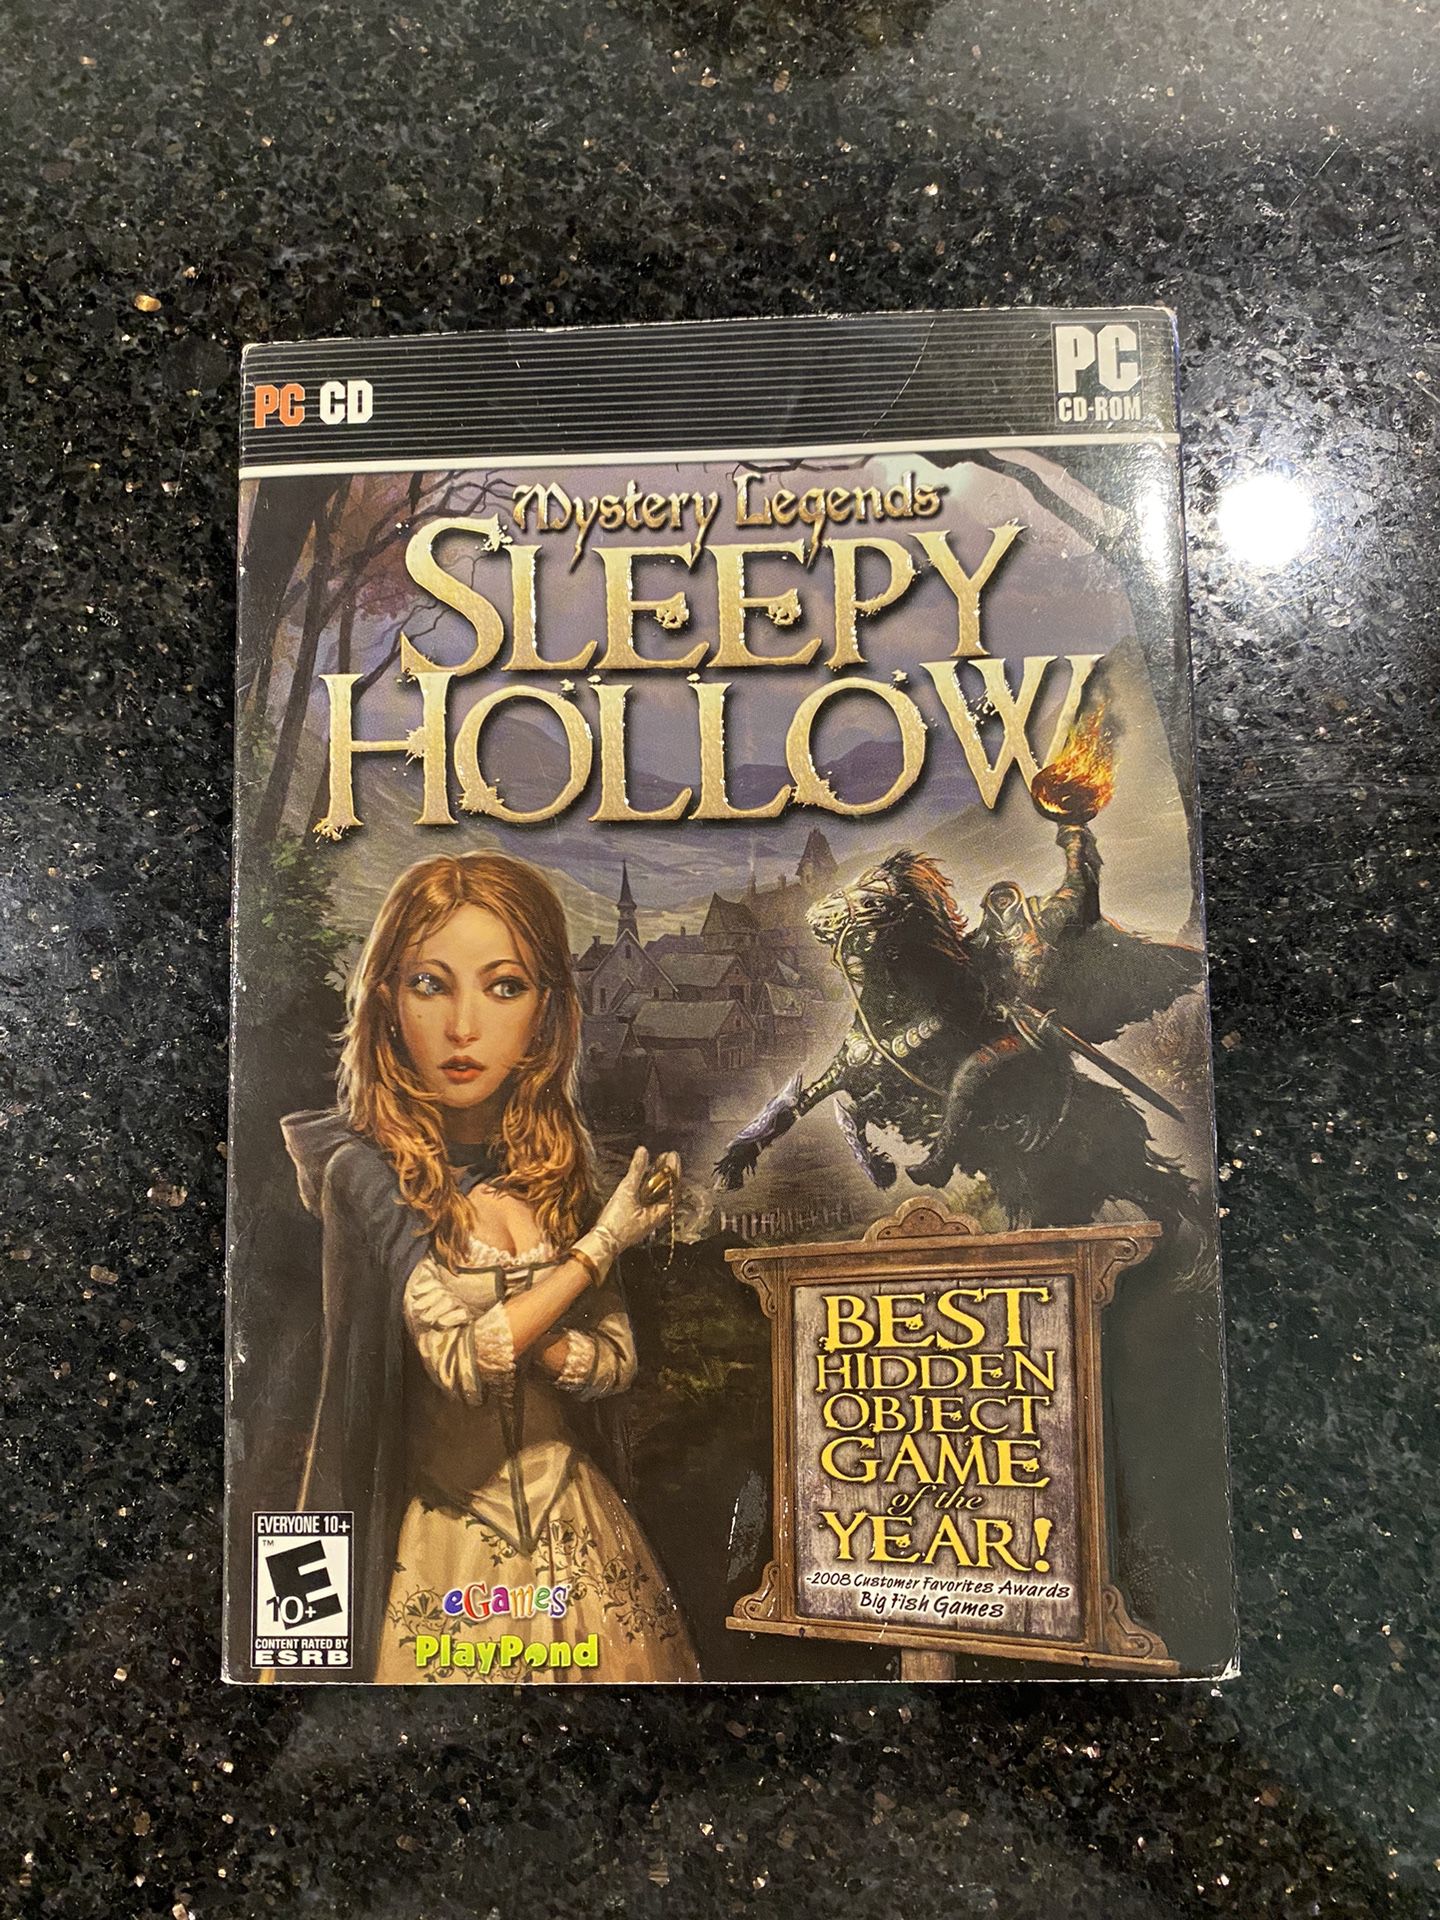 Mystery Legends Sleepy Hollow Horror Hidden Object Puzzle Game PC CD-ROM